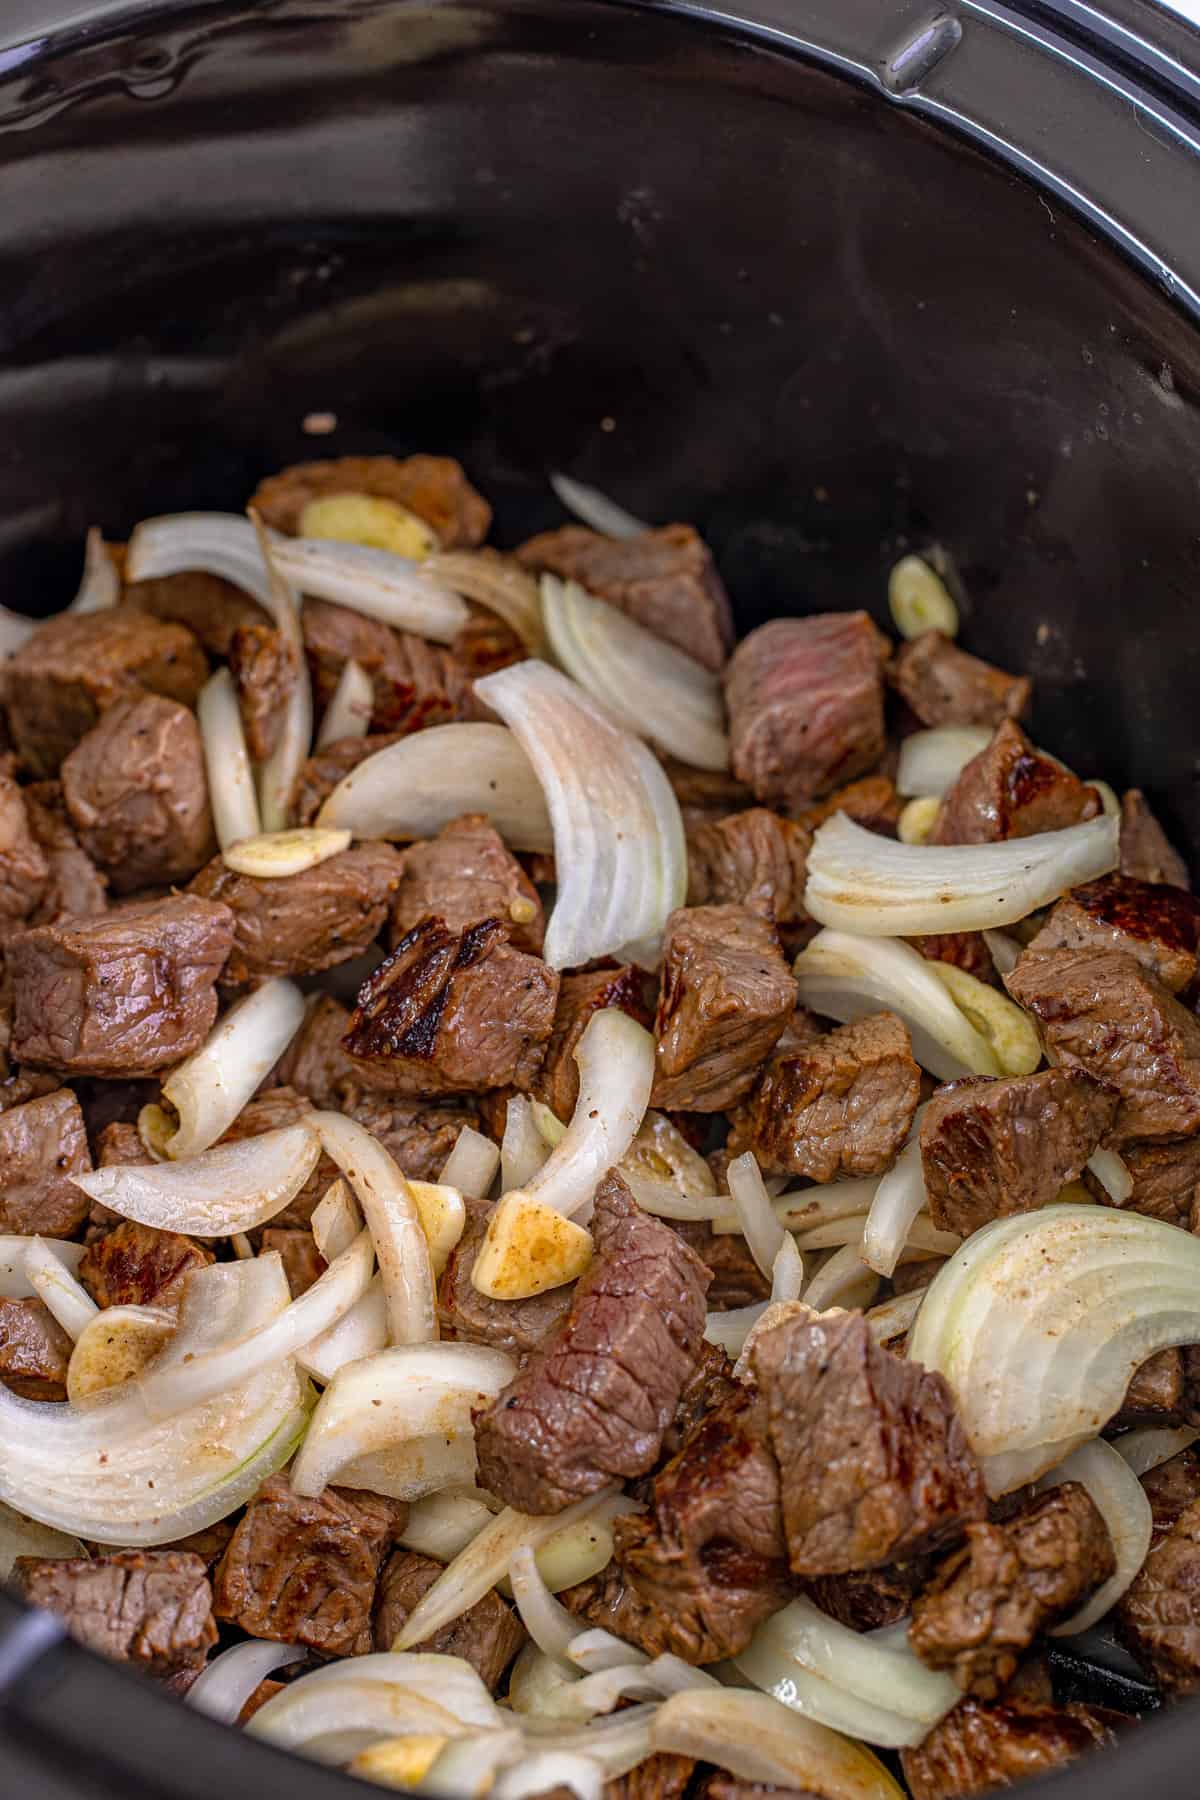 Steak bites with garlic and onions in crockpot.